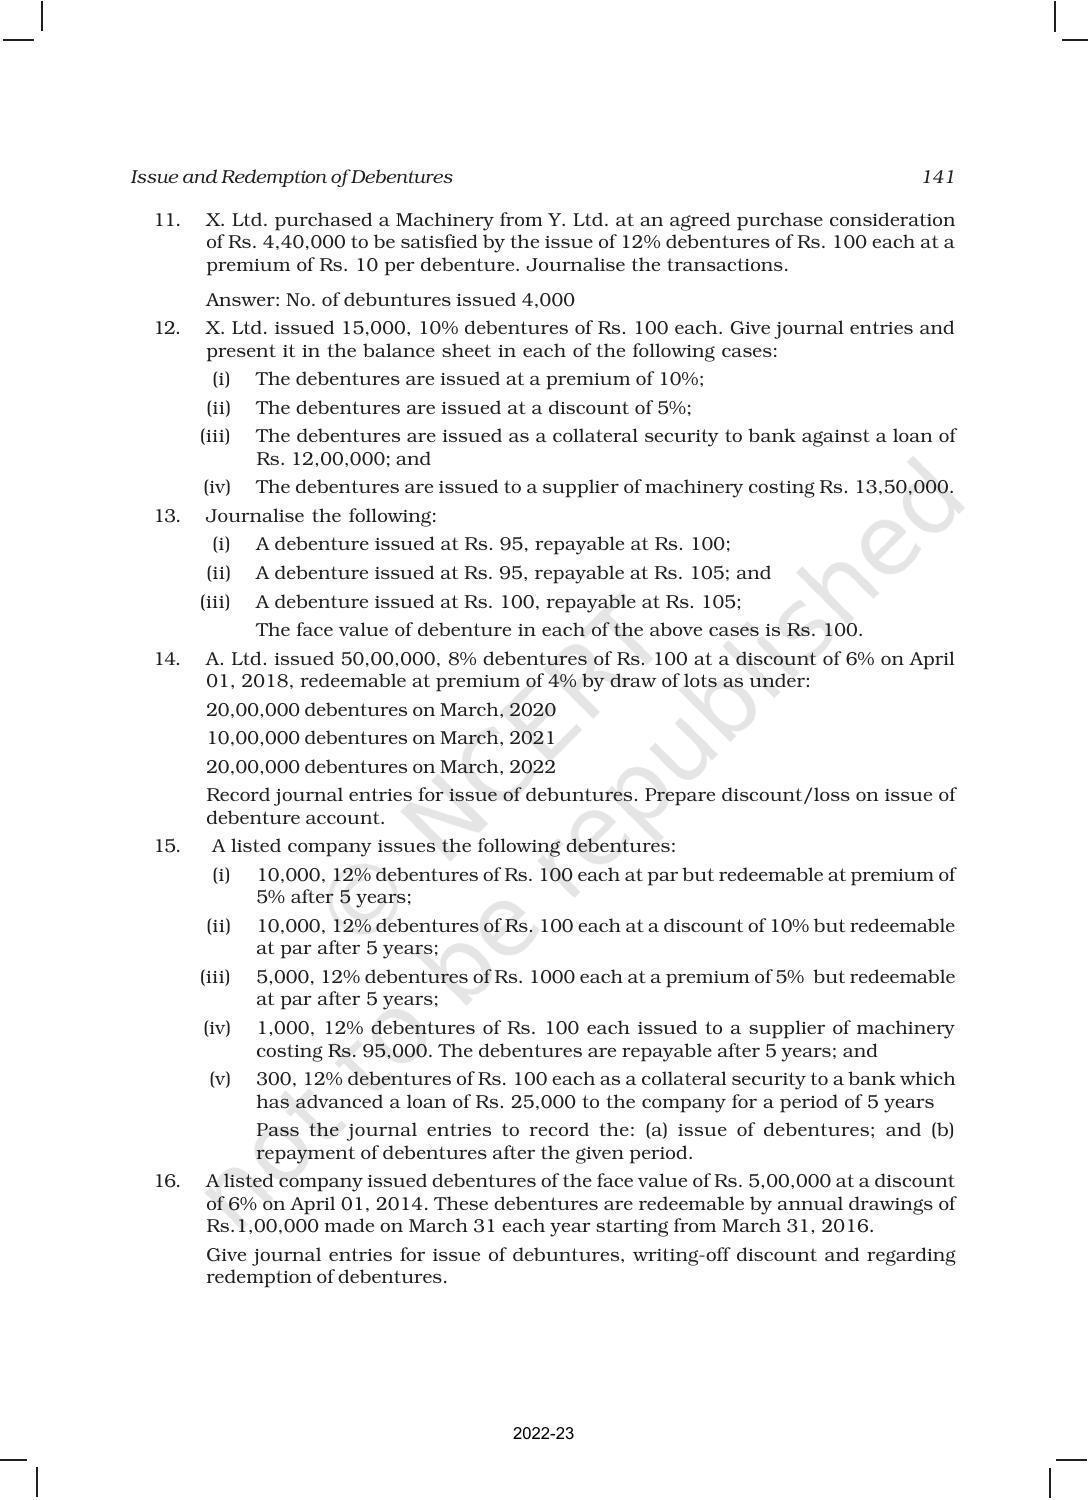 NCERT Book for Class 12 Accountancy Part II Chapter 1 Issue and Redemption of Debentures - Page 67